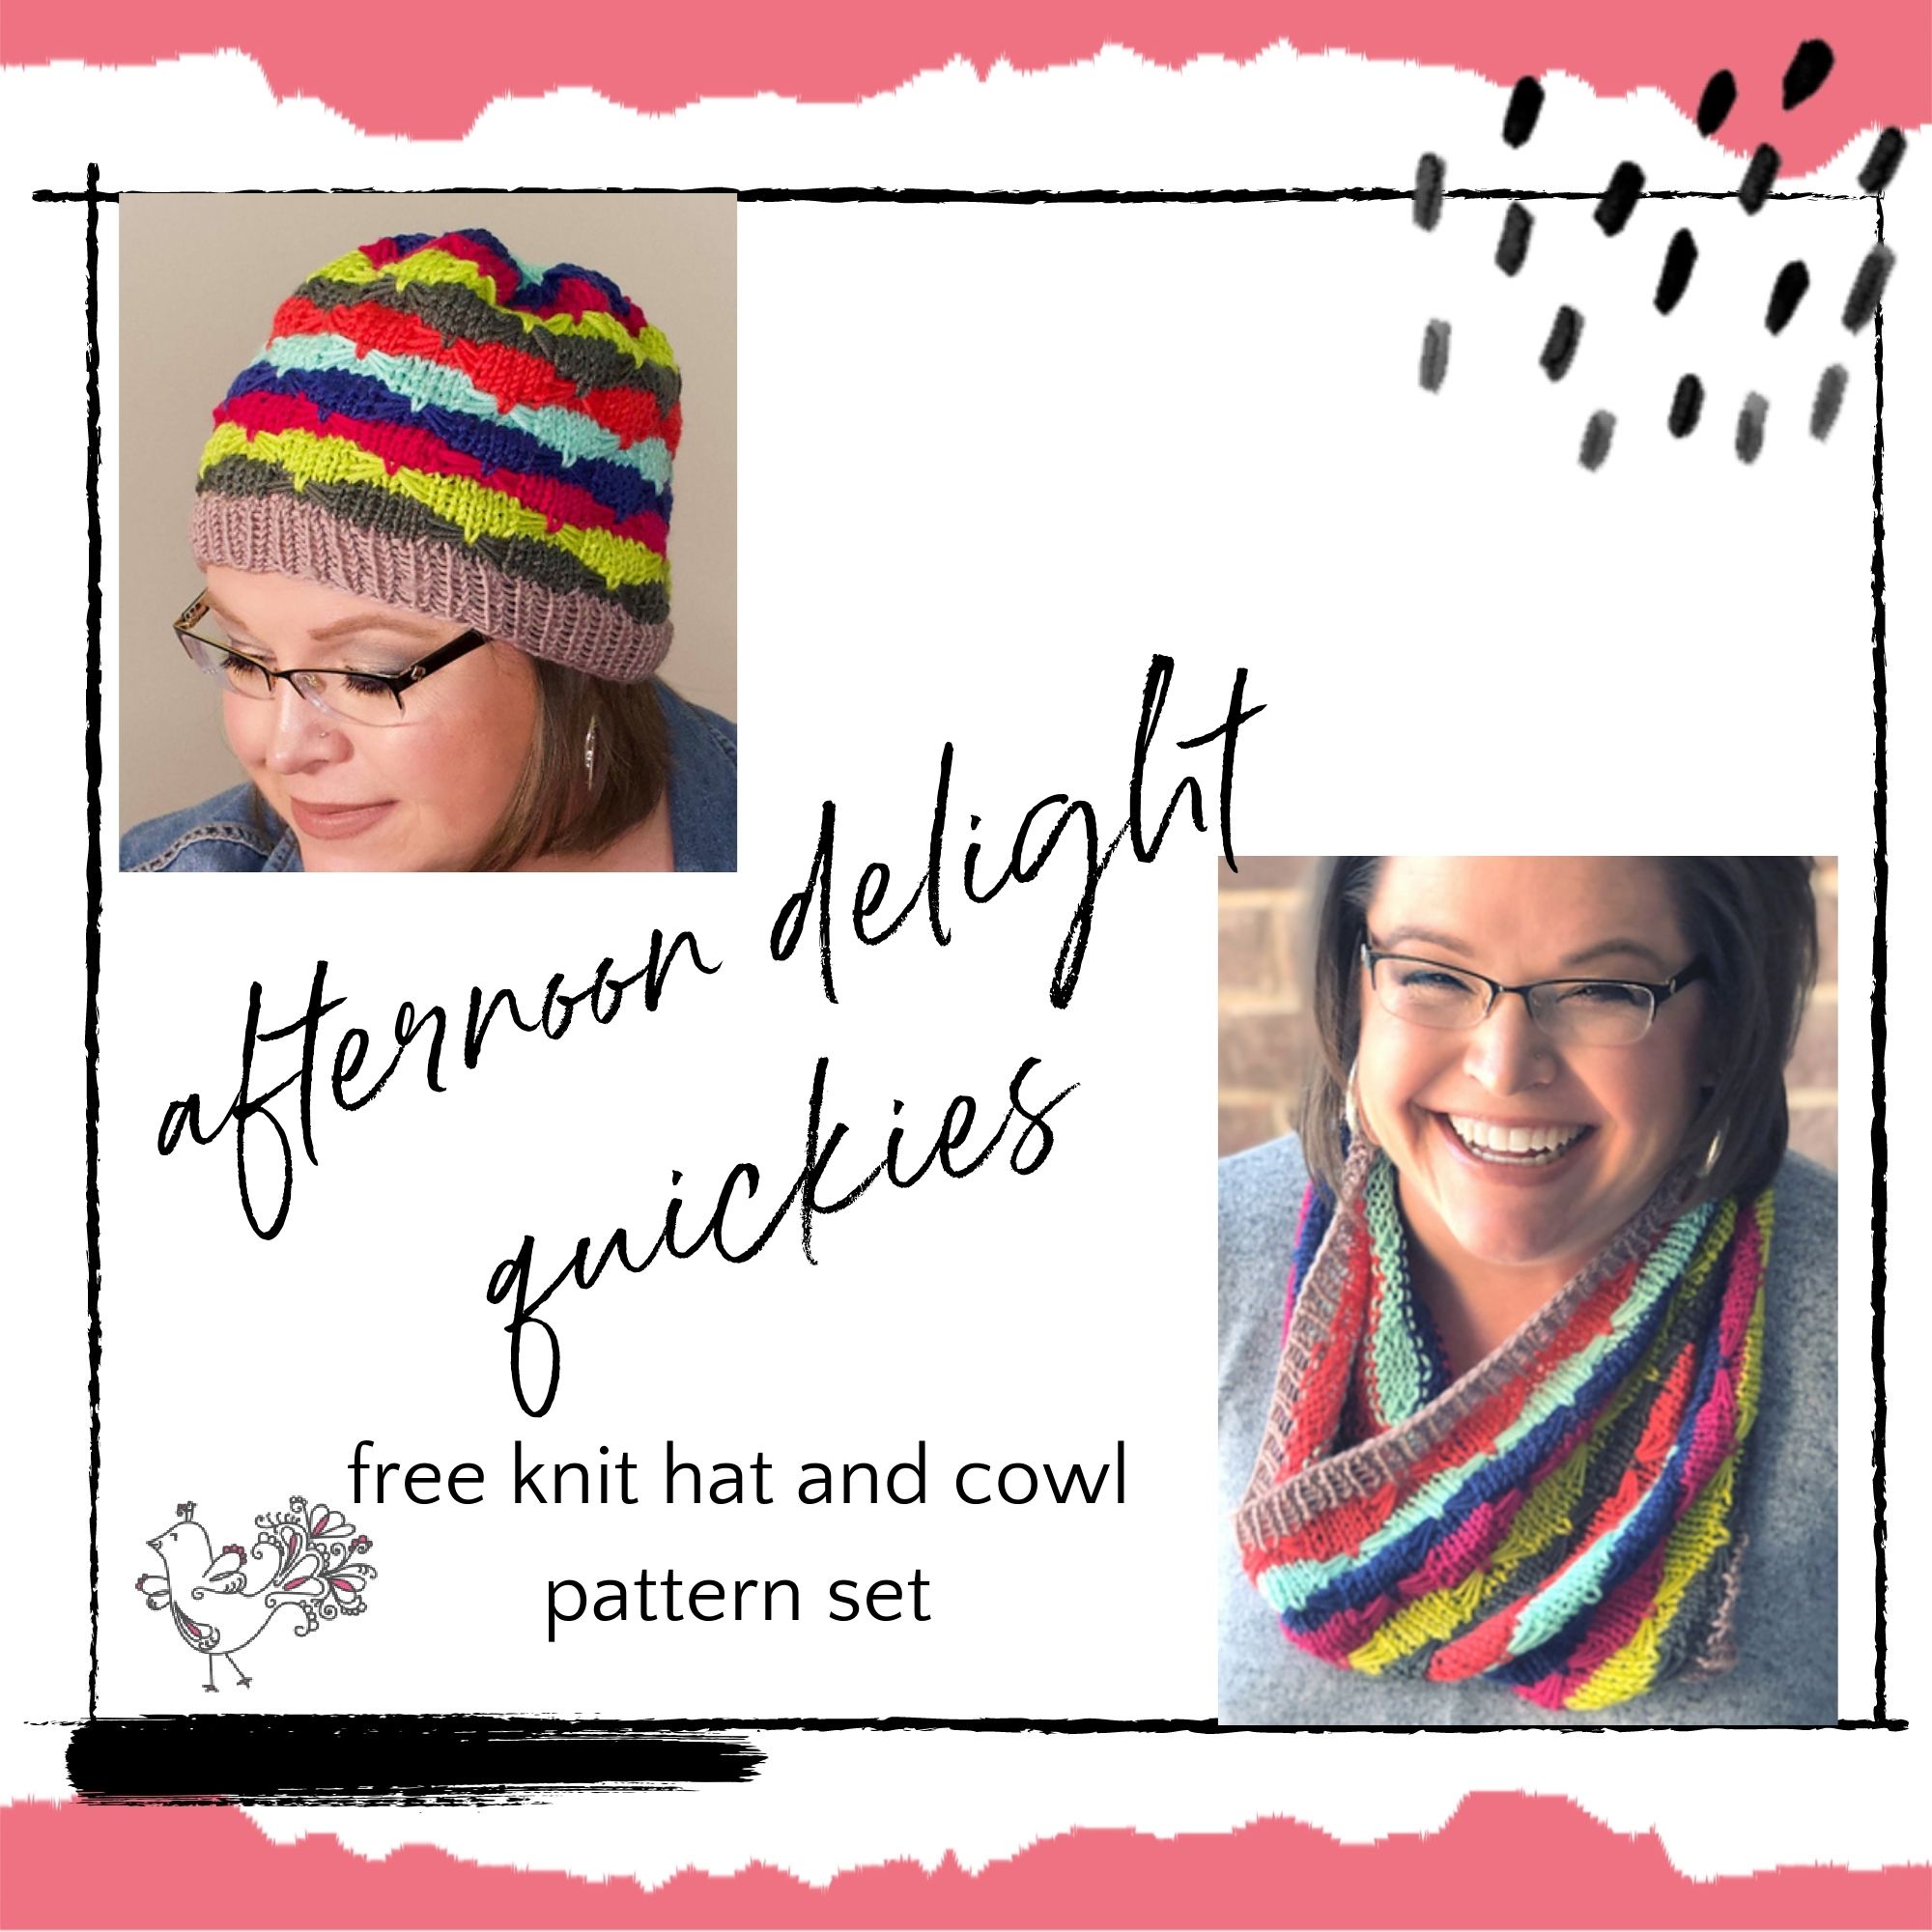 afternoon delight quickies knitting patterns